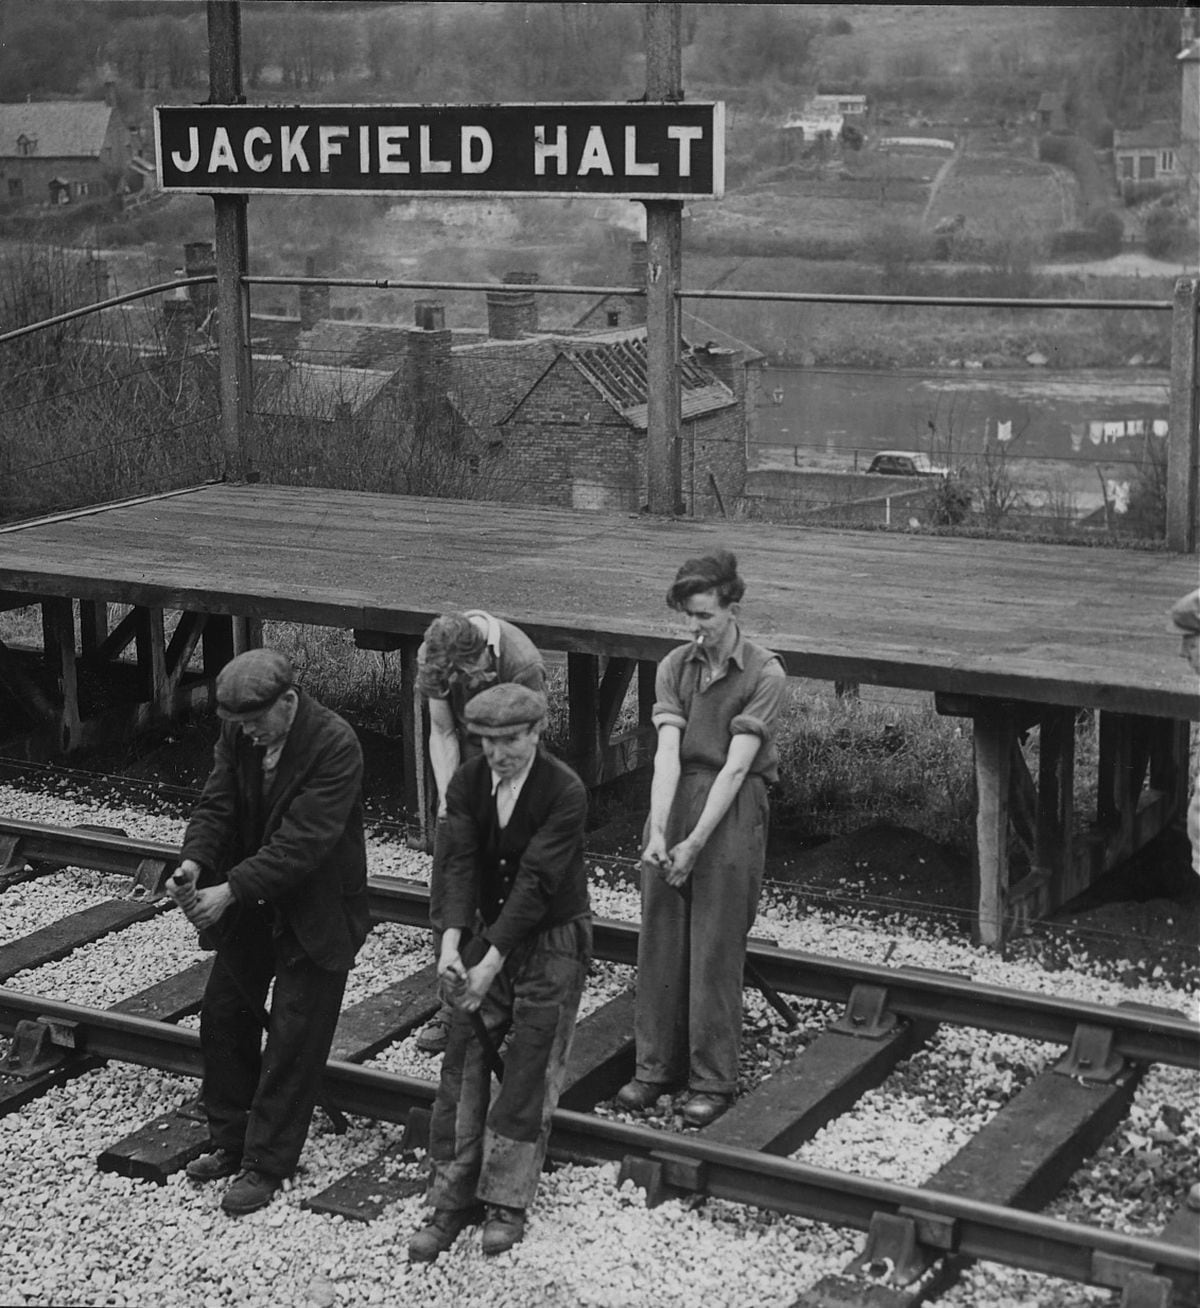 Workmen straightening the distorted railway line. Back: left, Alf Bowdler, a ganger, from Coalport; right, Eddie Minton, from Broseley. Front: left, Reg Wall, from Ironbridge; right, Ted Aston, from Jackfield.